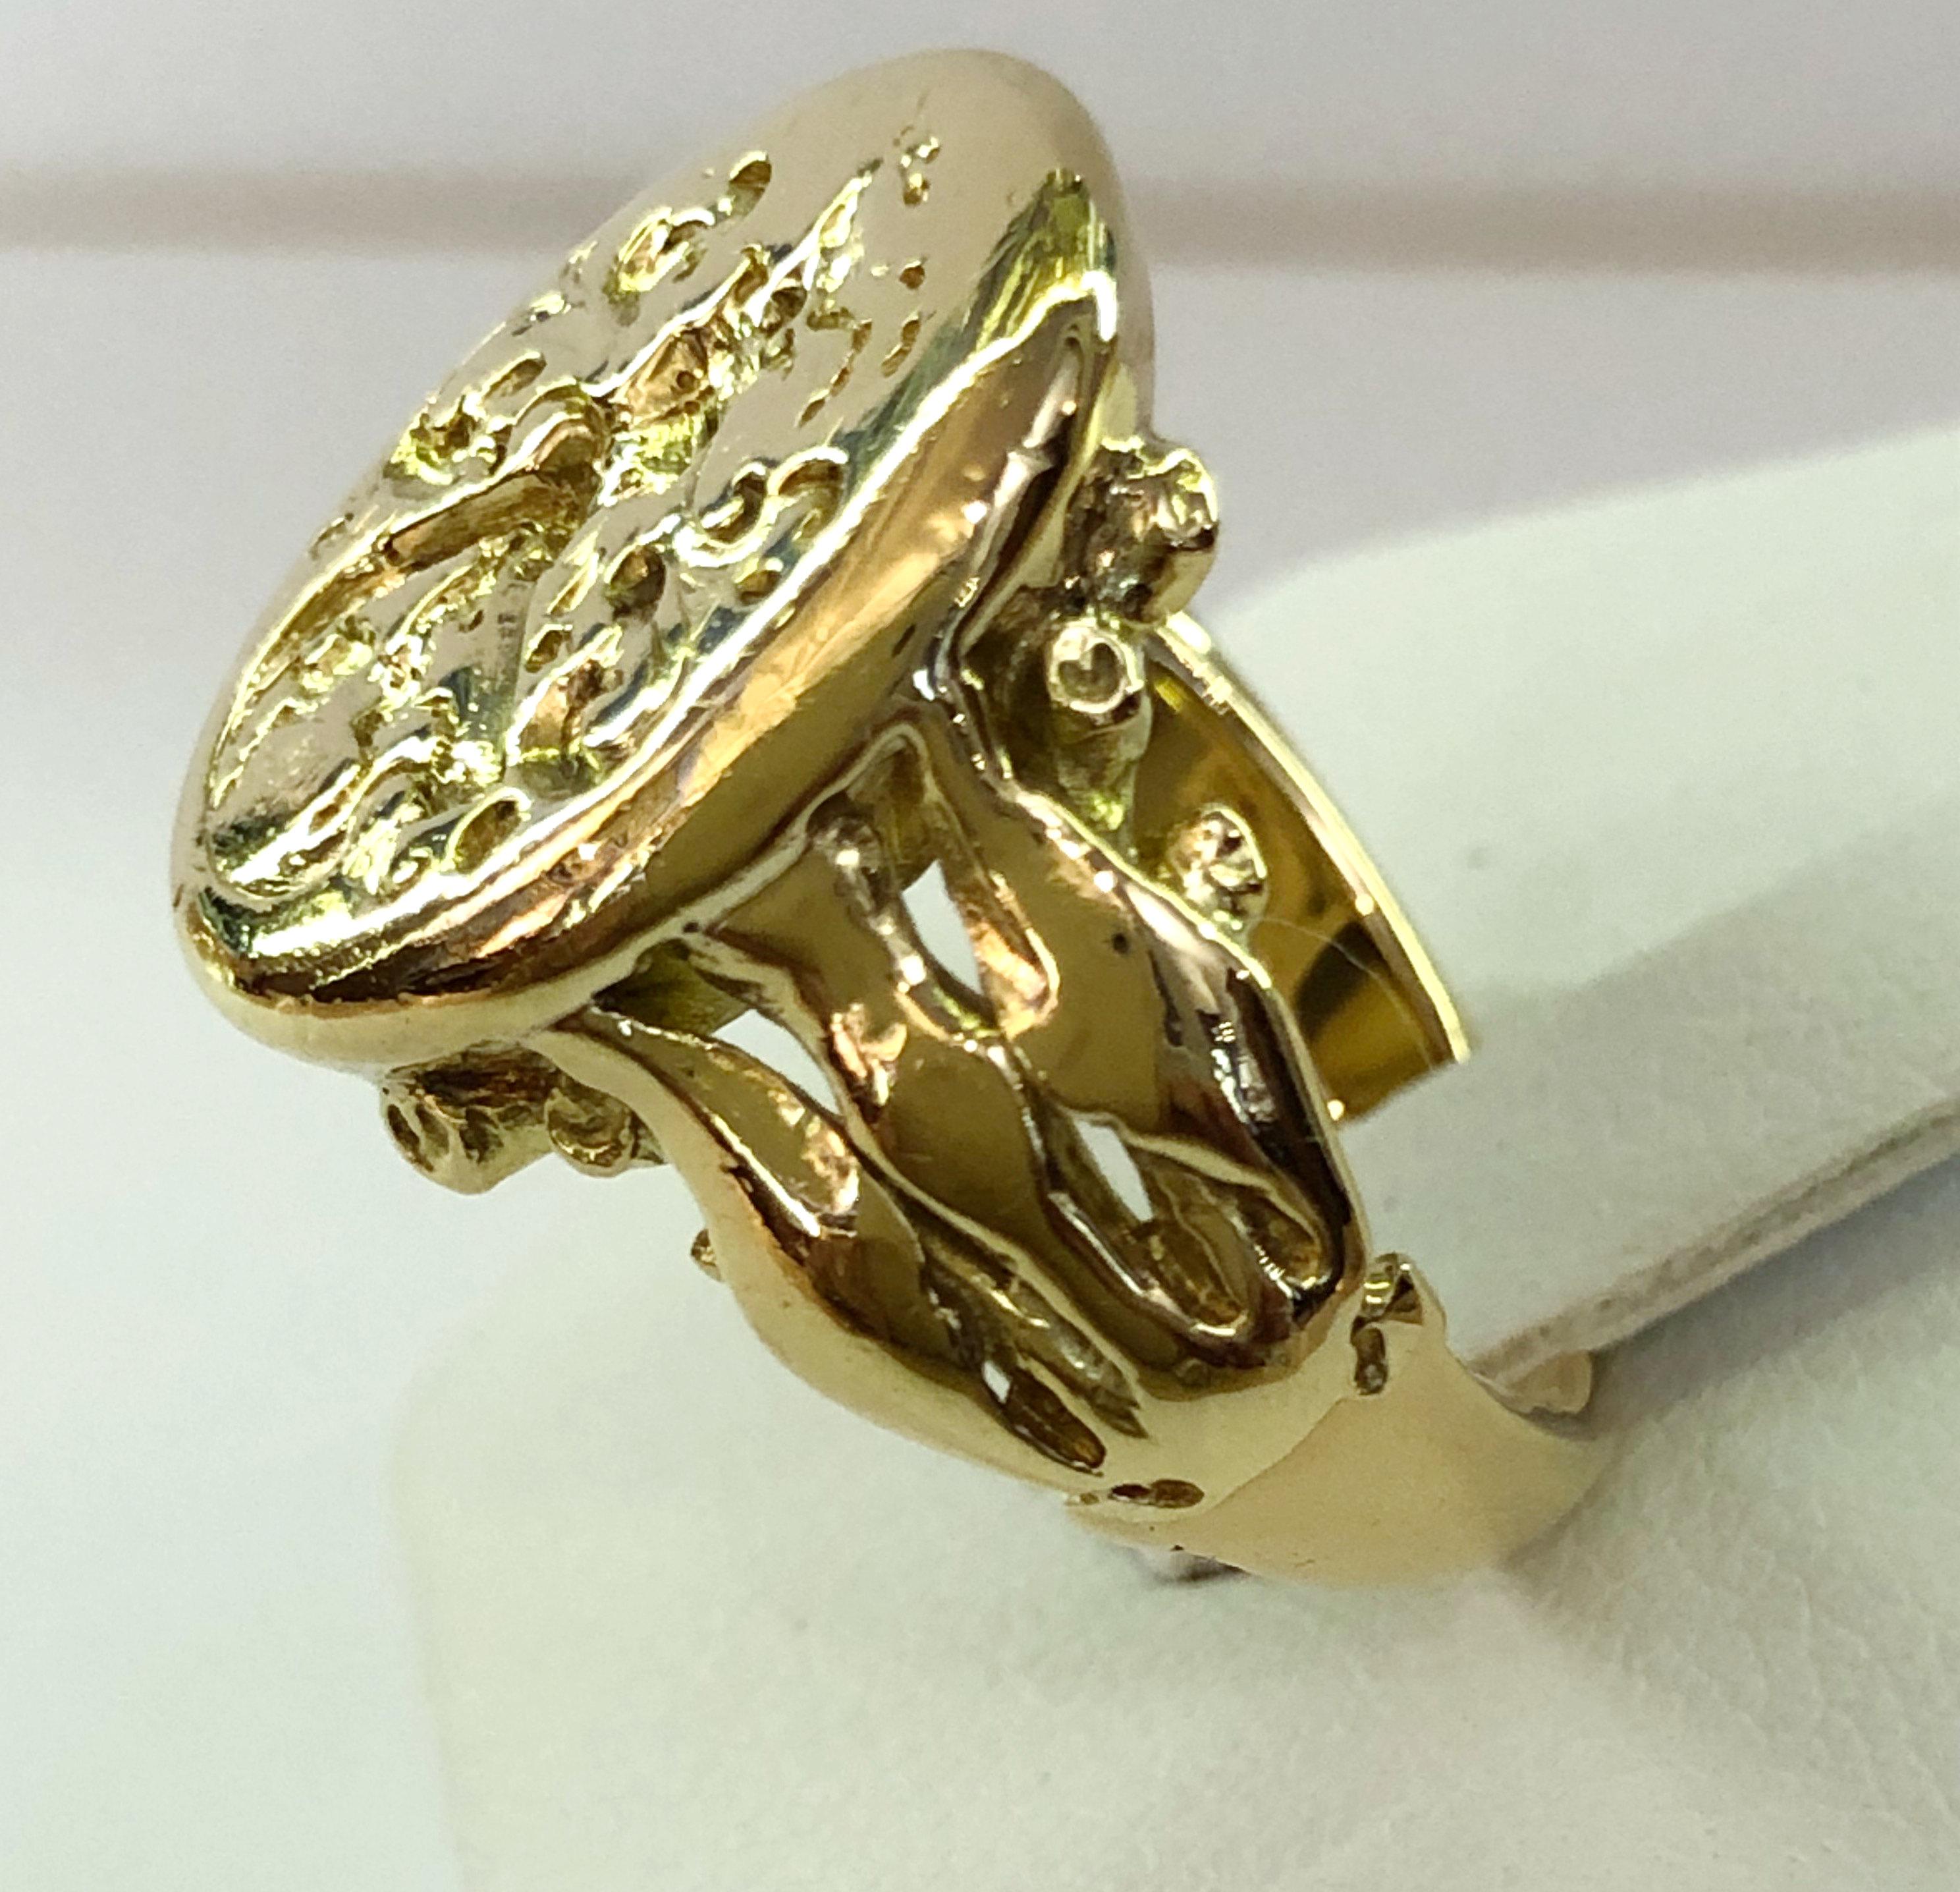 Vintage 18 karat yellow gold ring with an oval shaped emblem, Italy 1960-1970s
Ring size US 7.5